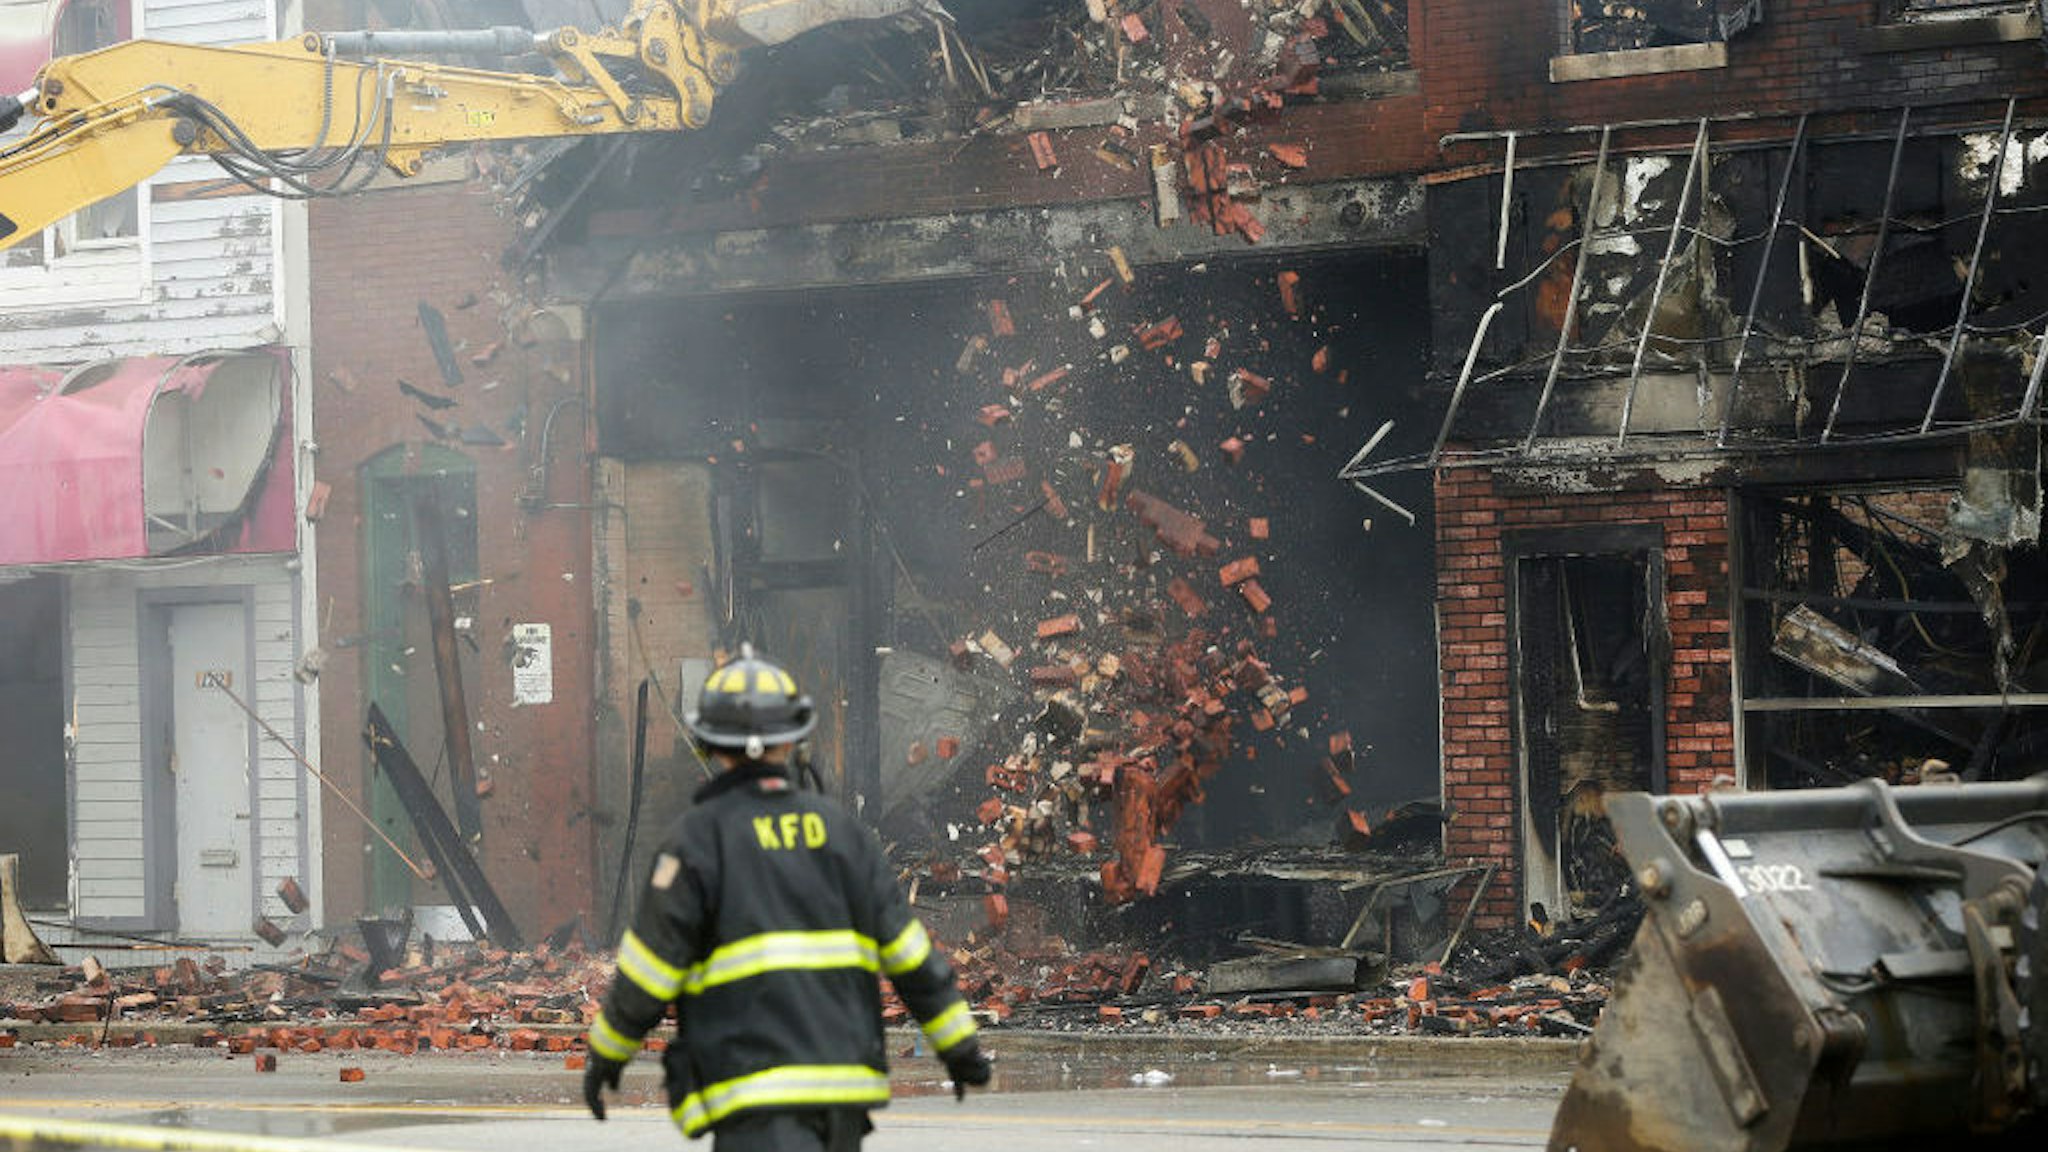 A firefighter watches as a business destroyed by a fire is demolished after protesters set fires to business during overnight riots on Tuesday, August 25, 2020 in Kenosha, Wisconsin. Demonstrators are protesting the police shooting of JacobBlake, who was shot in the back multiple times by police officers responding to a domestic dispute call Sunday. Photo by Joshua Lott for The Washington Post via Getty Images